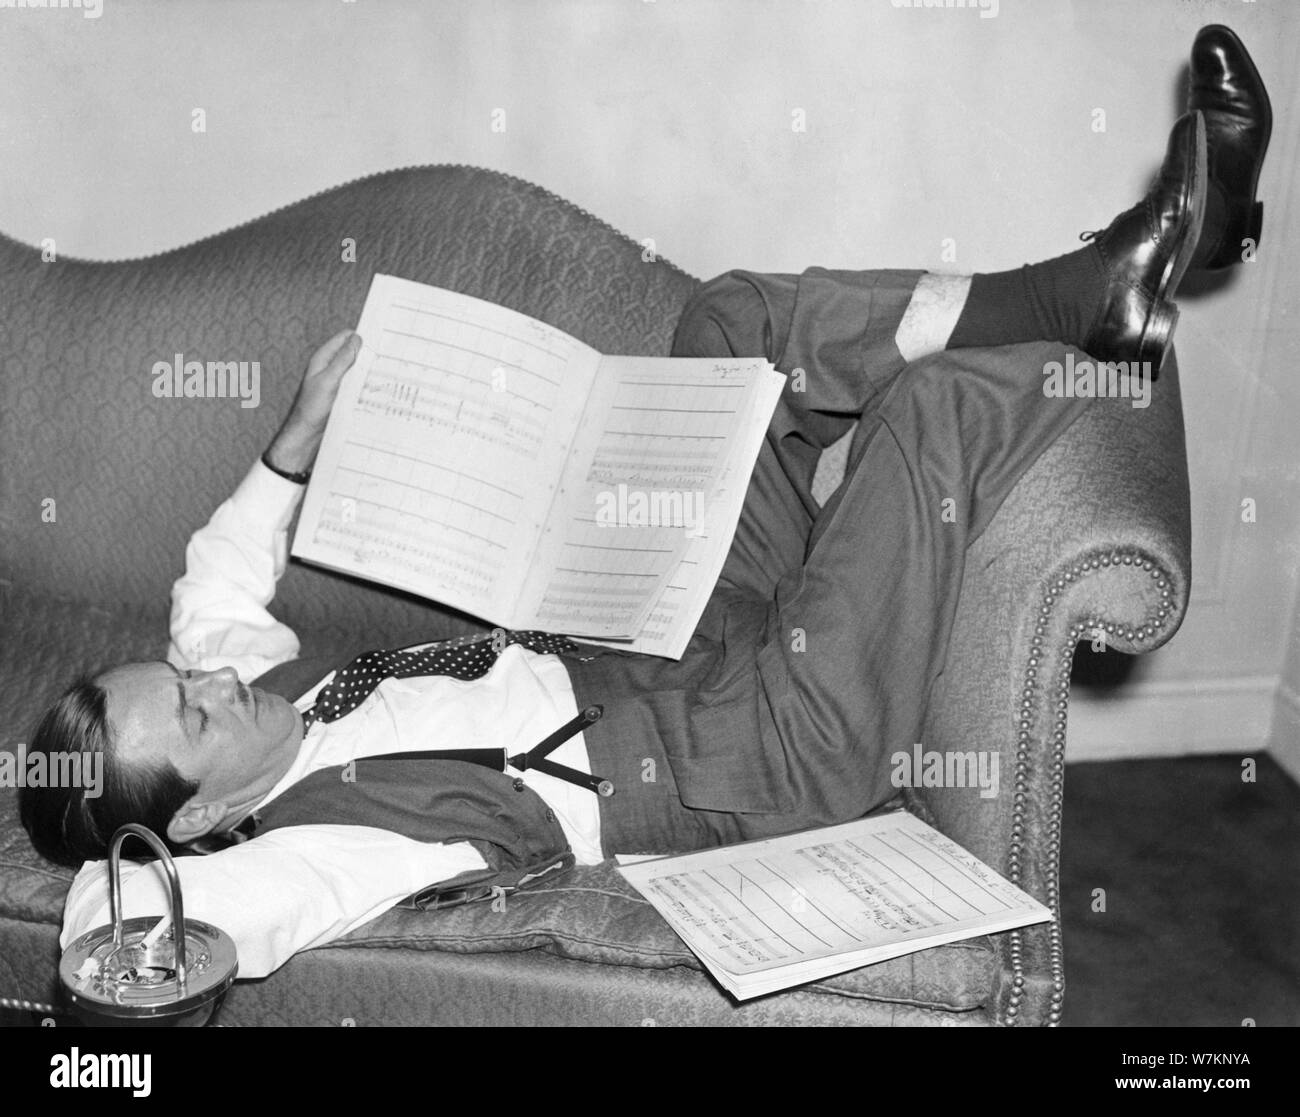 WALT DISNEY candid during recording of music for FANTASIA 1940 orchestra conducted by Leopold STOKOWSKI Animated Feature Film Walt Disney Productions / RKO Radio Pictures Stock Photo